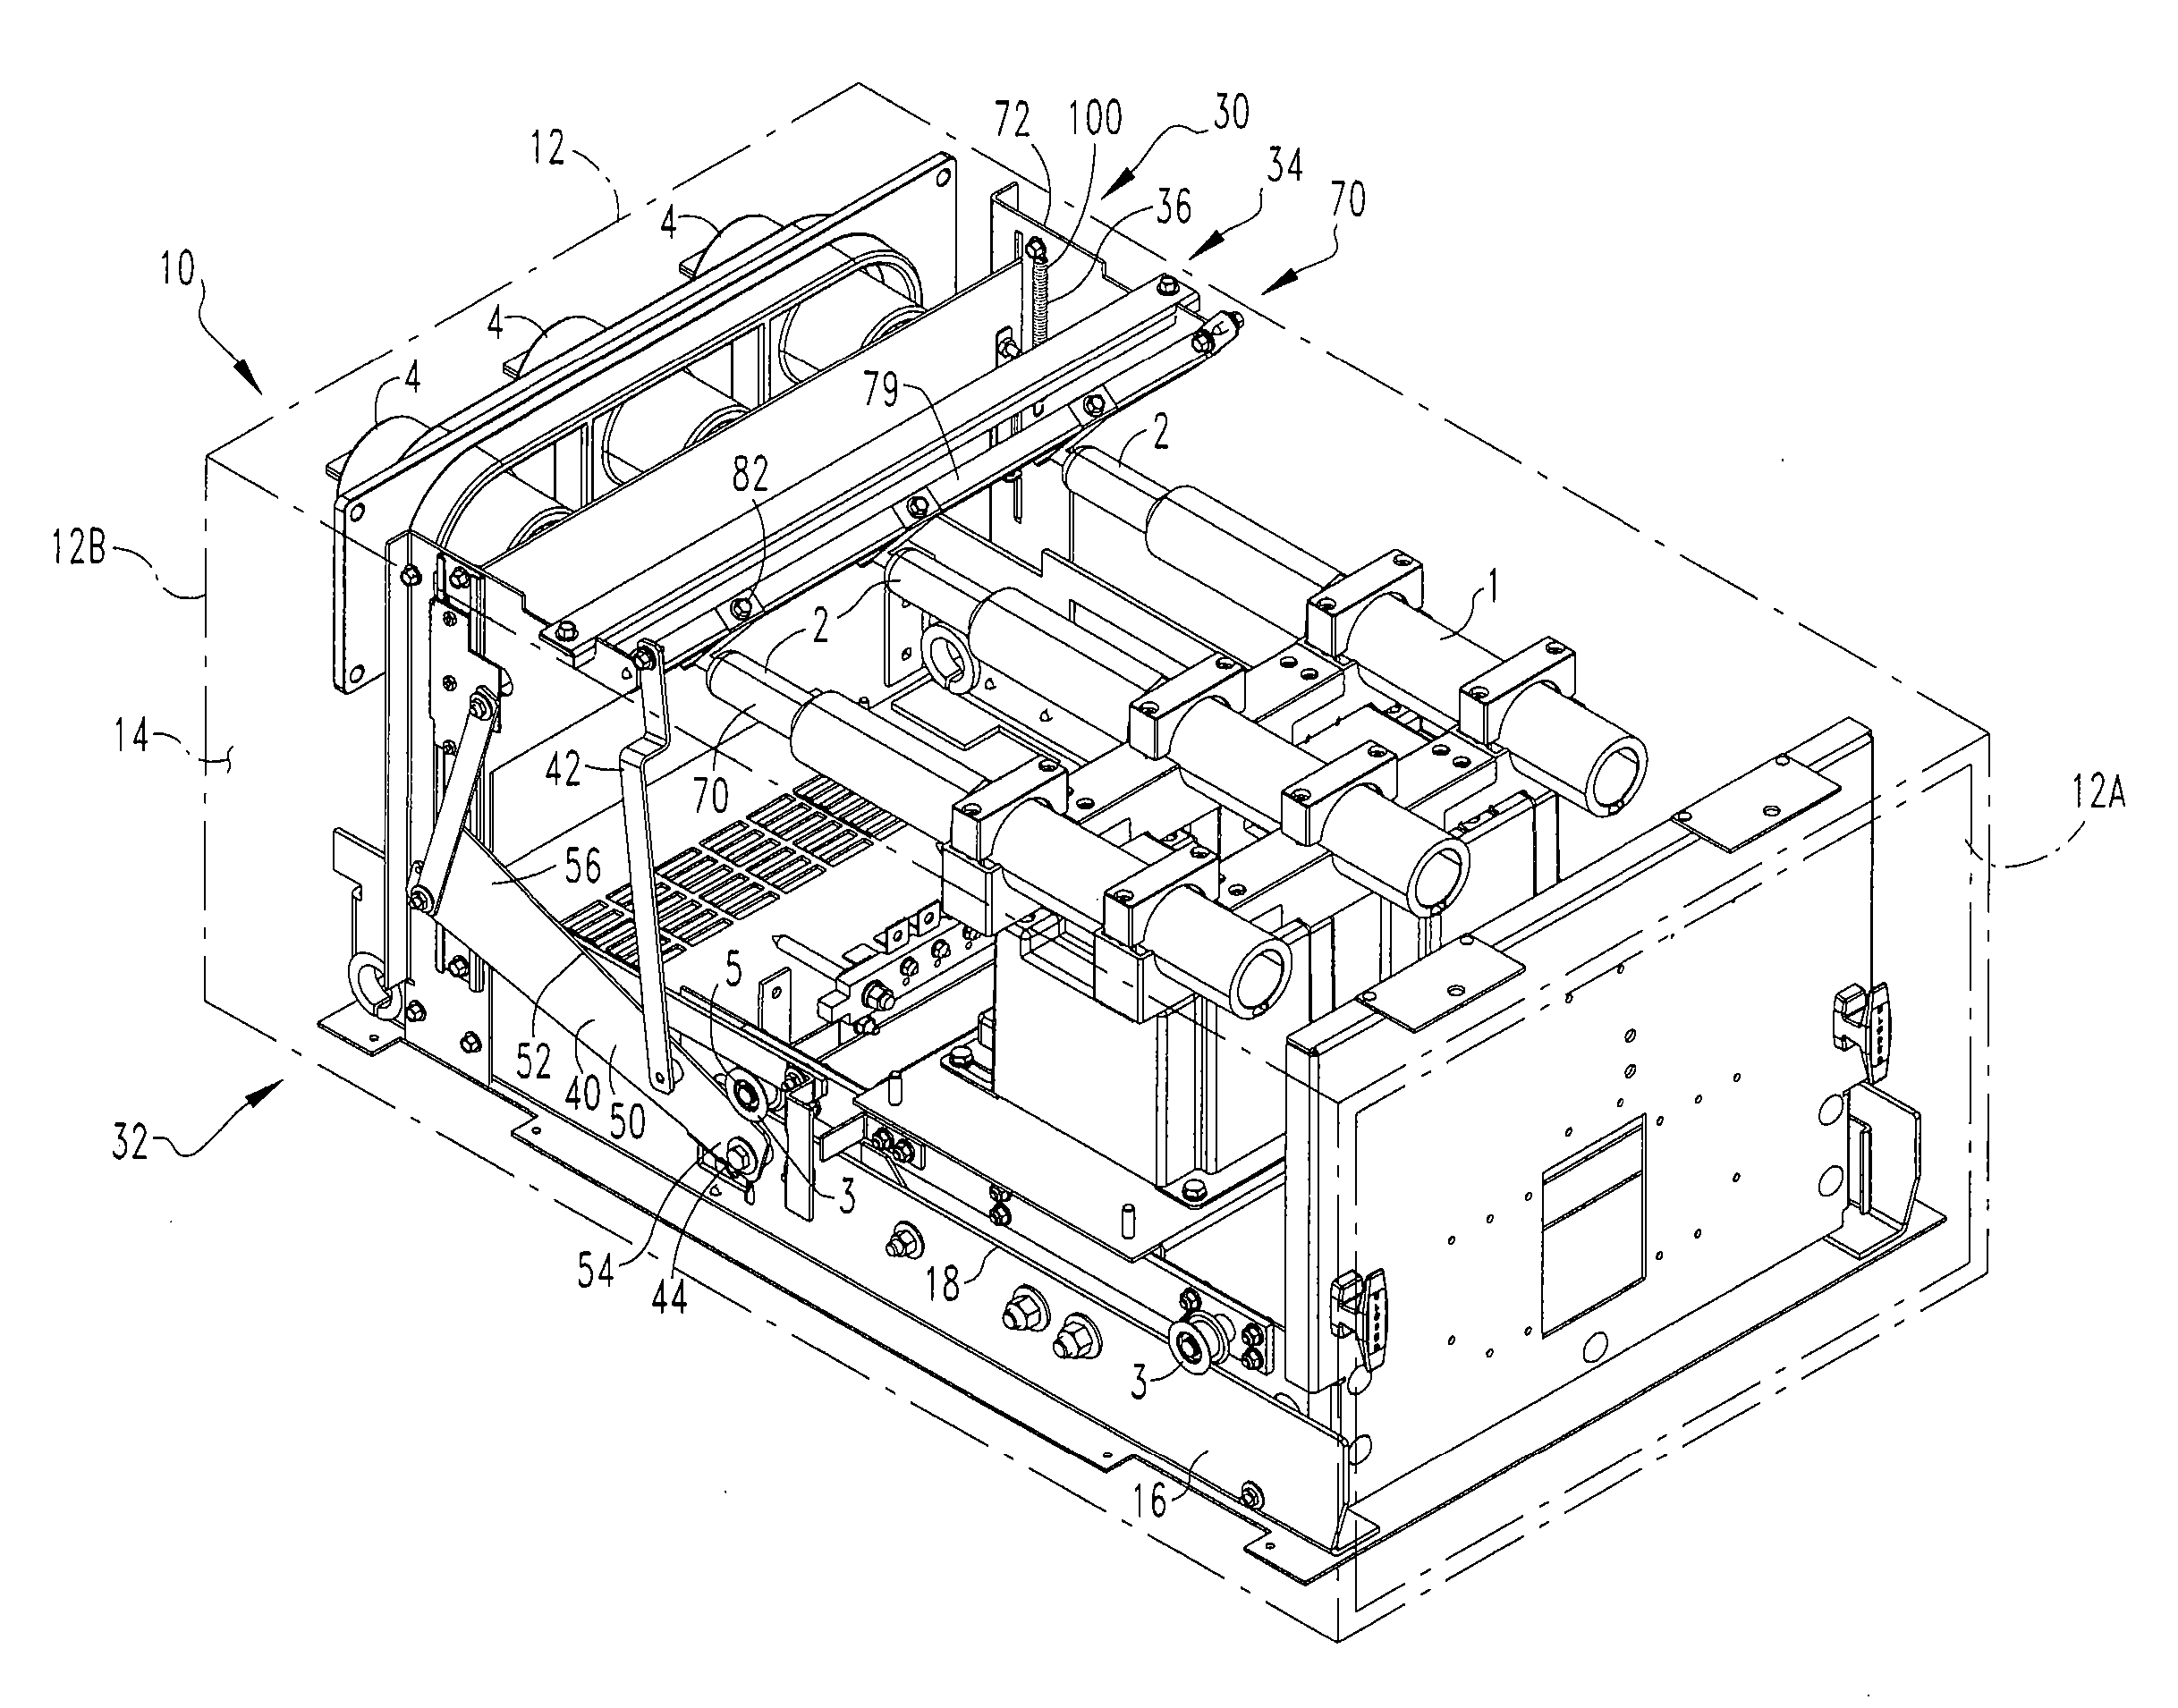 Automatic static grounding device for electrical components